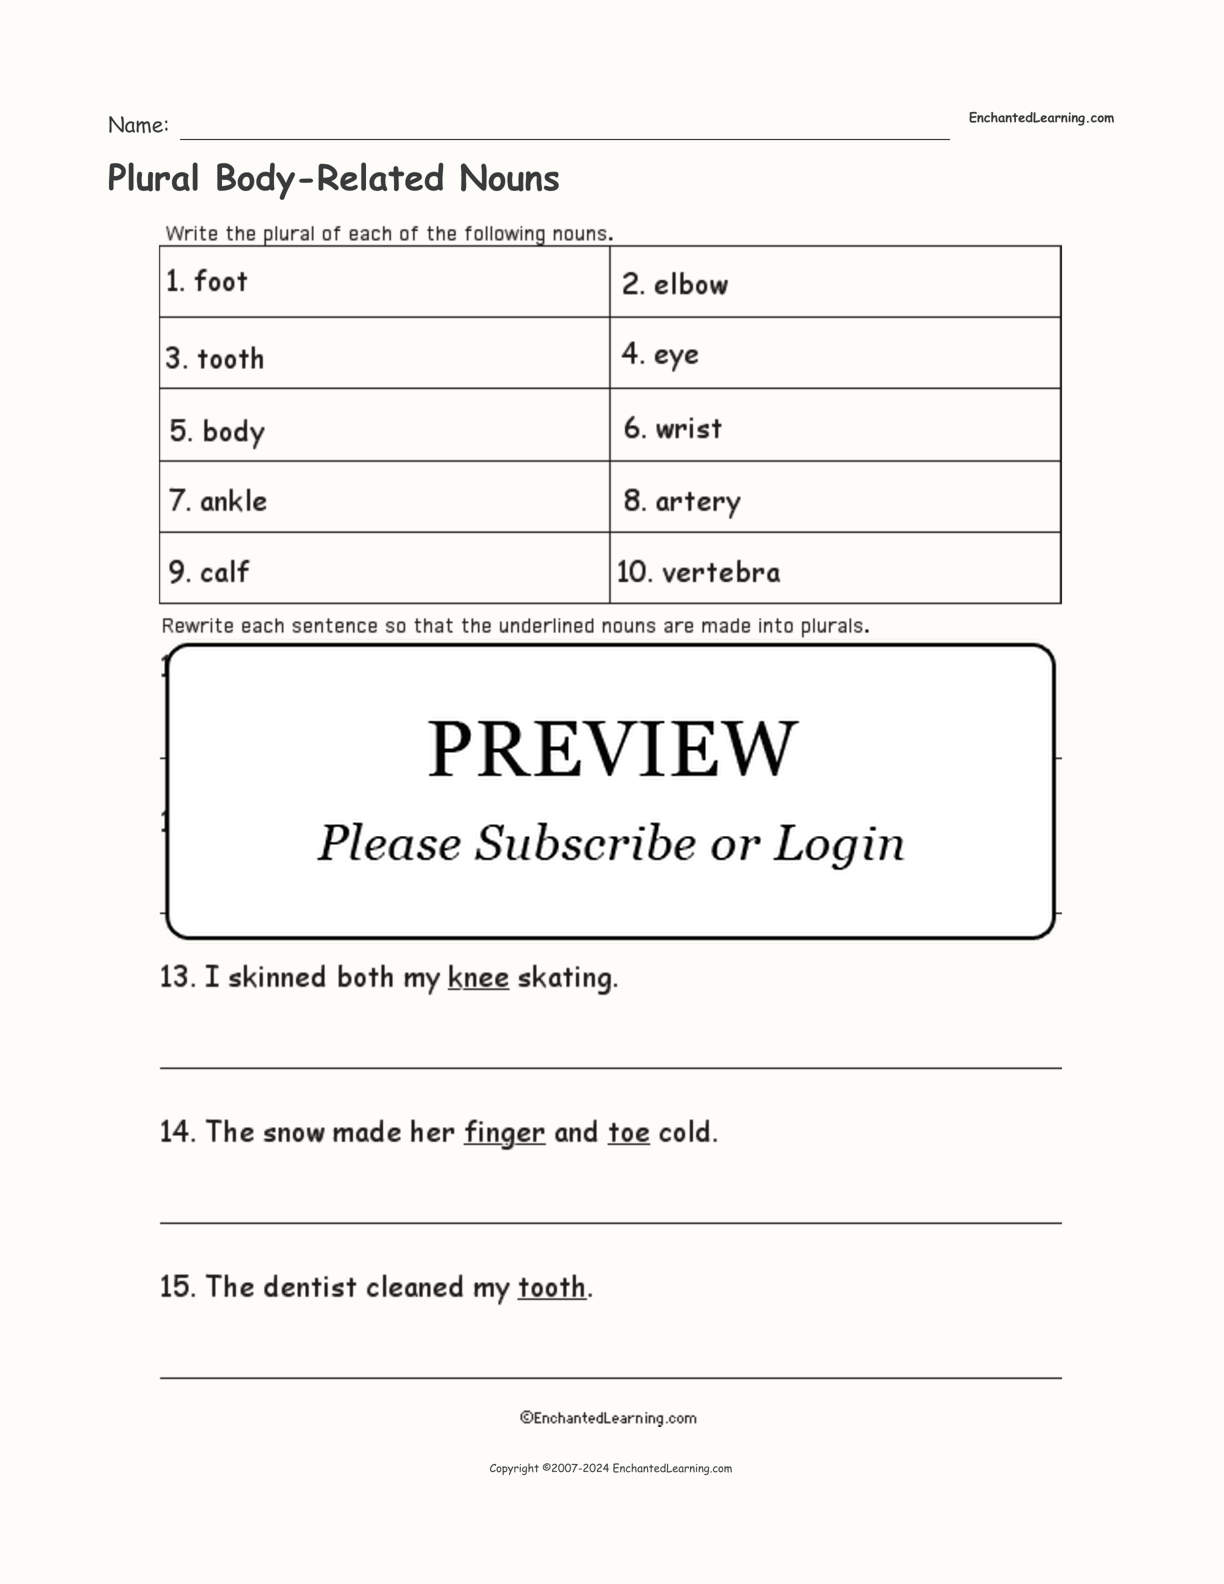 Plural Body-Related Nouns interactive worksheet page 1